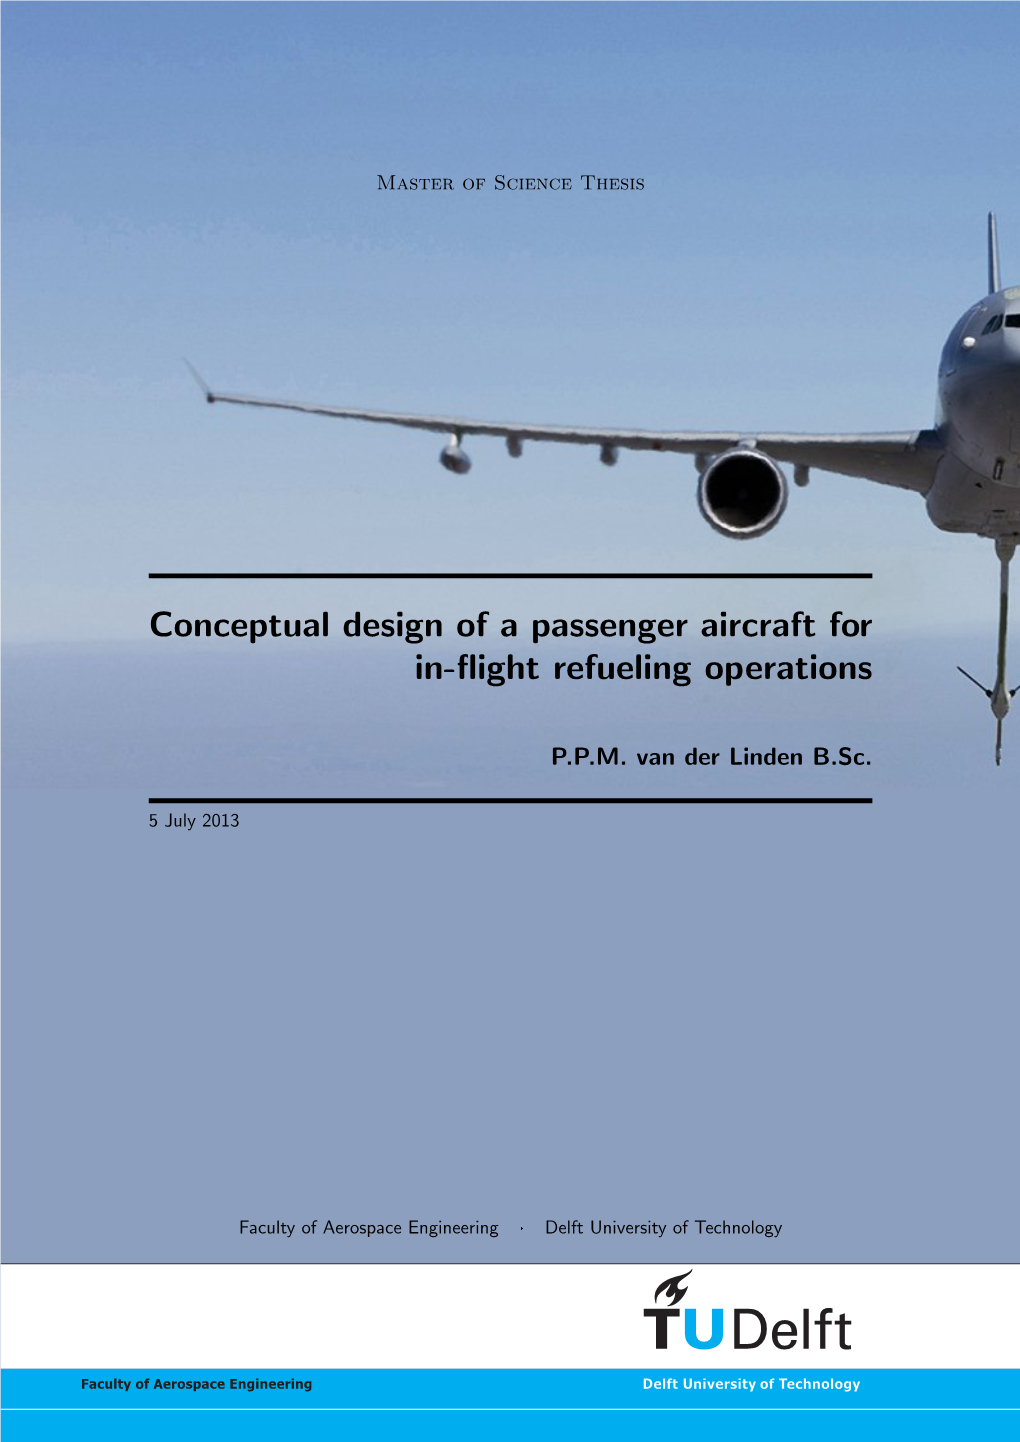 Conceptual Design of a Passenger Aircraft for In-Flight Refueling